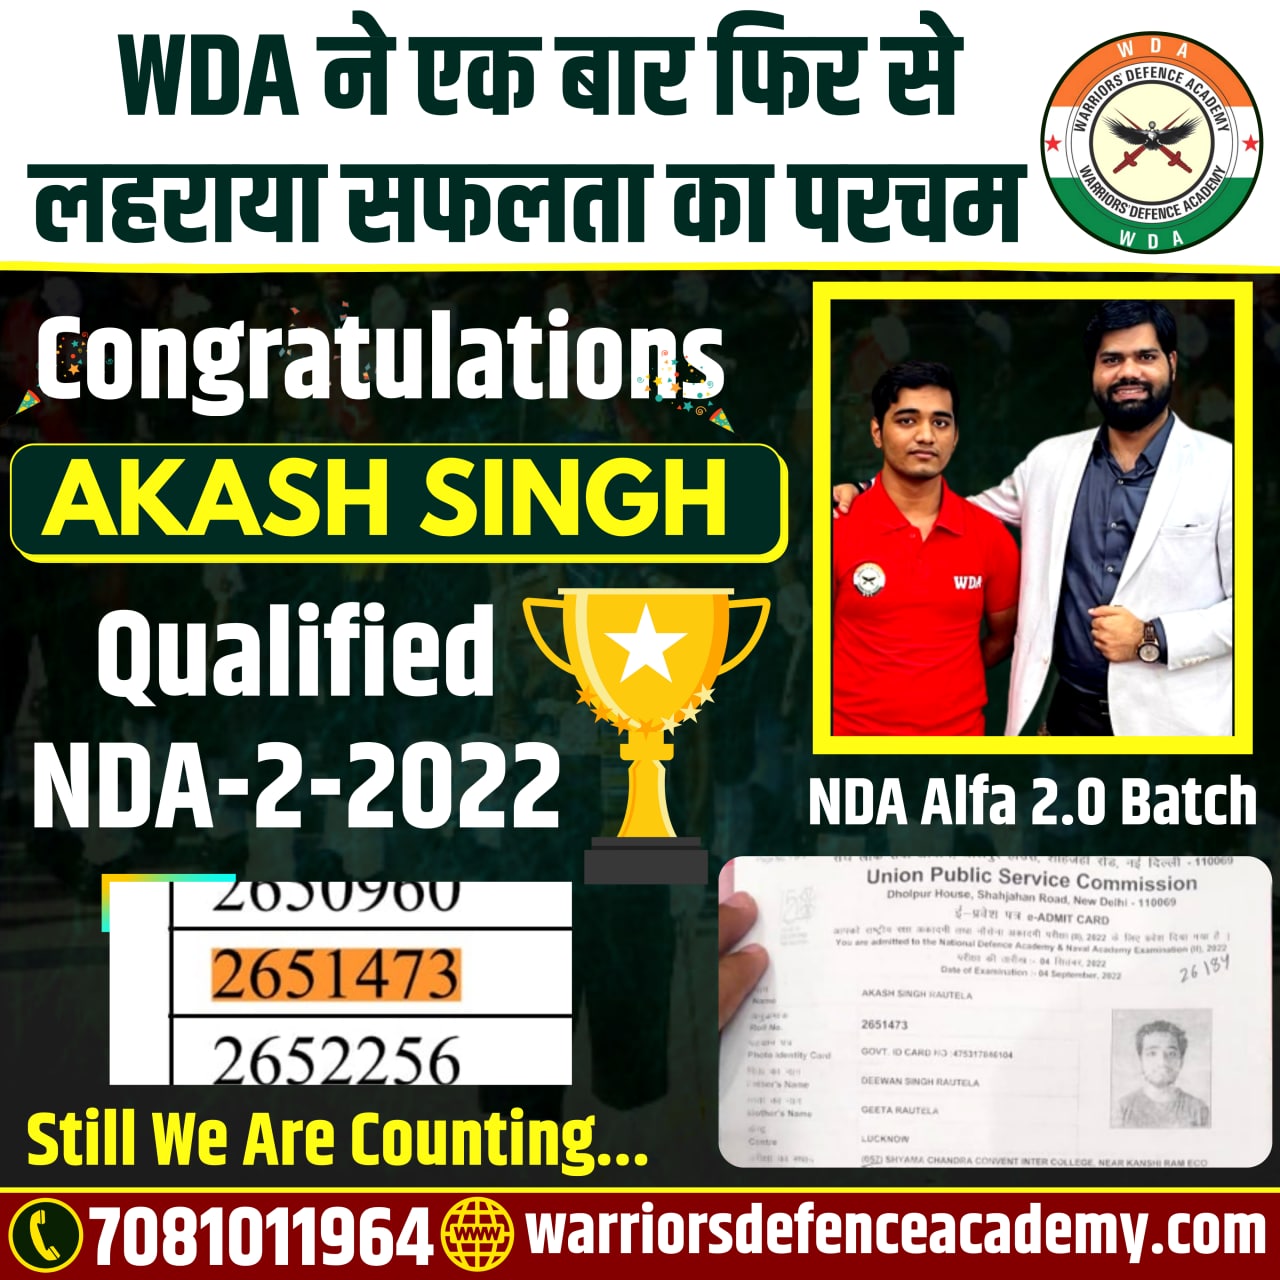 Best Defence Academy in Lucknow | Warriors Defence Academy Best NDA Coaching in Lucknow